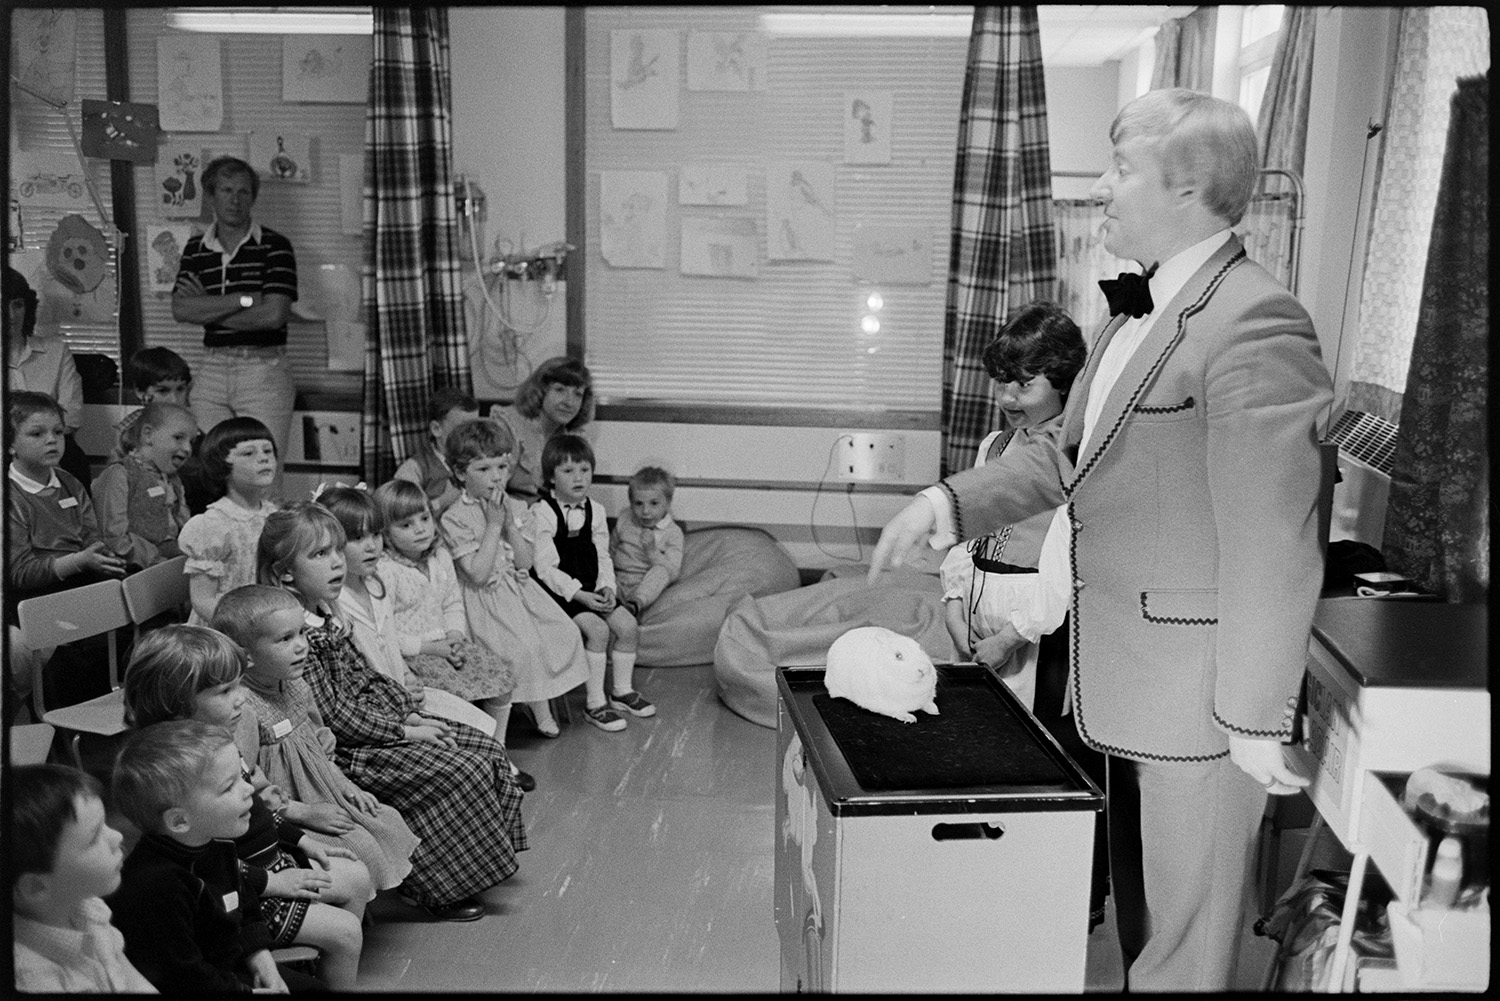 Conjuror at children's party in hospital. <br />
[Ian Adair, a magician, entertaining children at a party on the Children's Ward at Barnstaple General Hospital. He has a rabbit in front of him.]